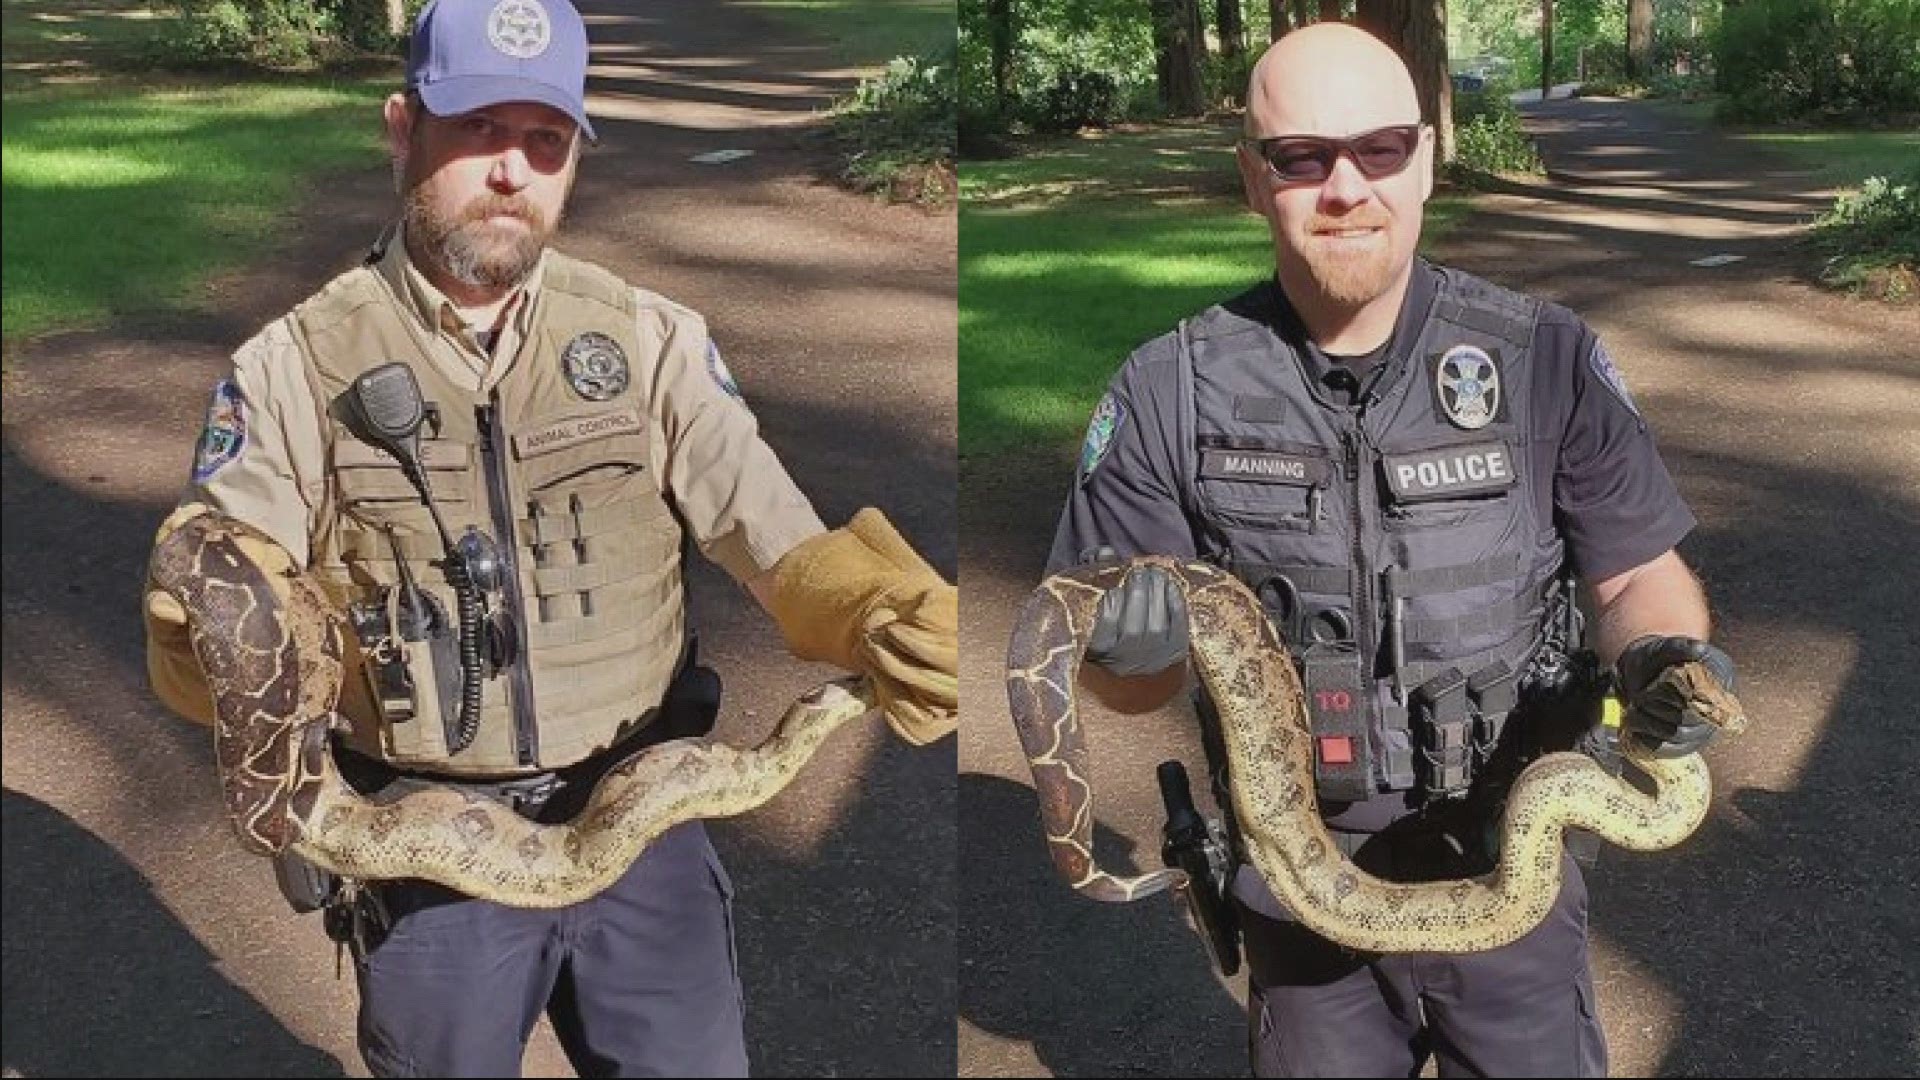 Police said authorities assume the snakes were dumped in the park by someone who owned them as pets.